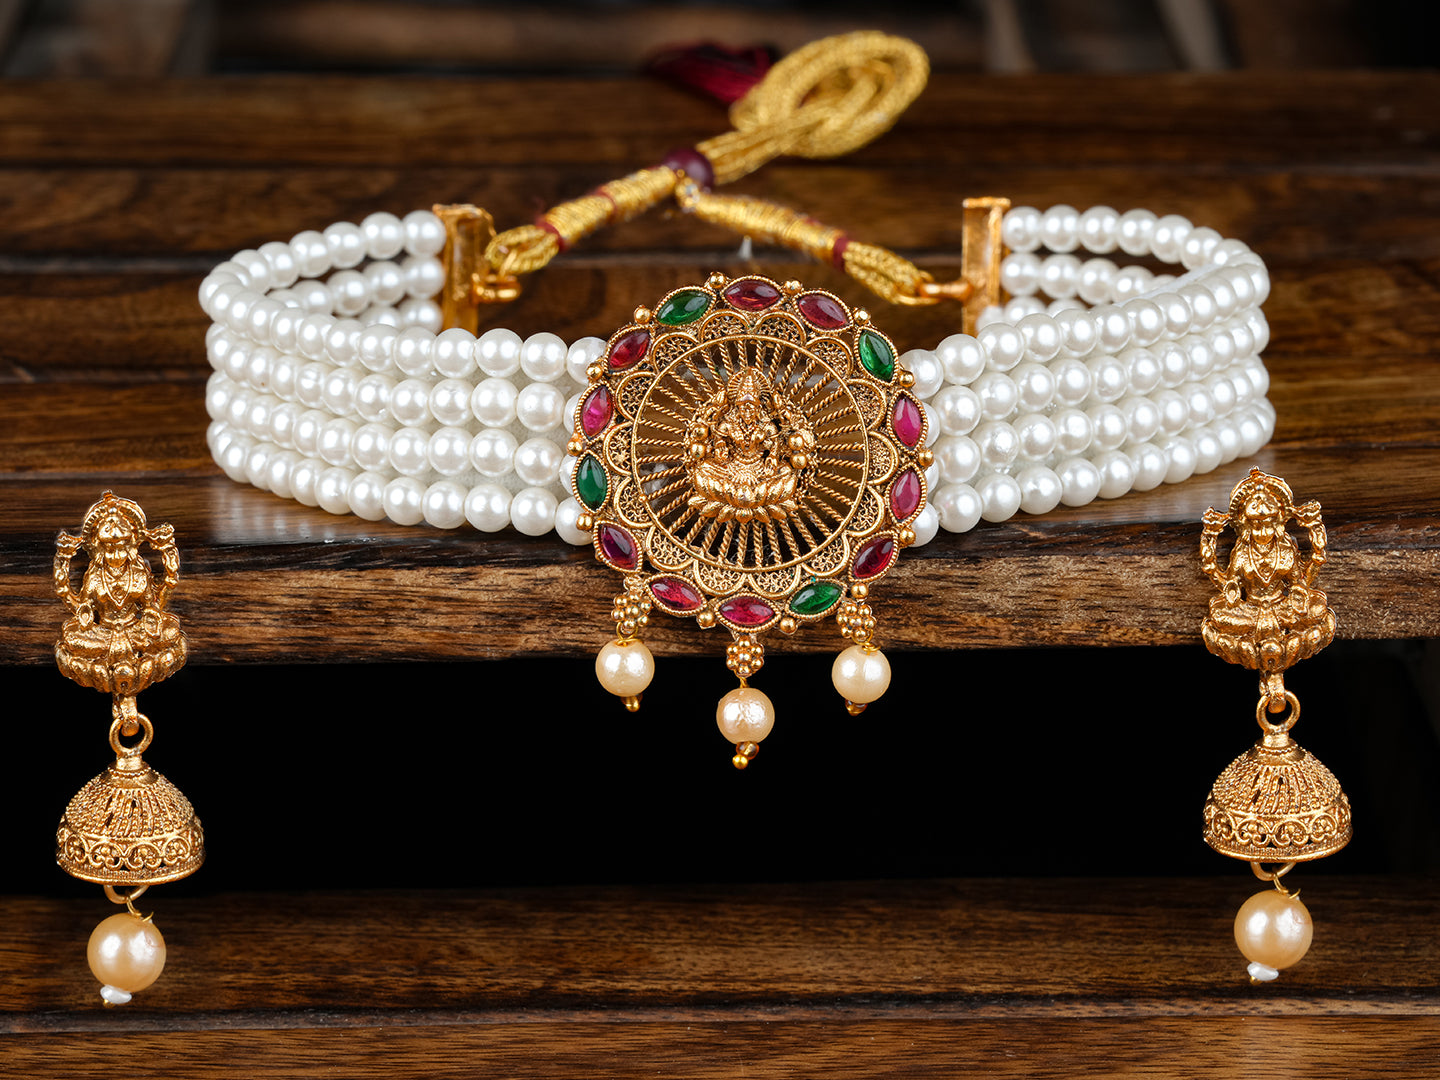 Gold-Plated Treditional Design Temple Choker Necklace Set With Earrings